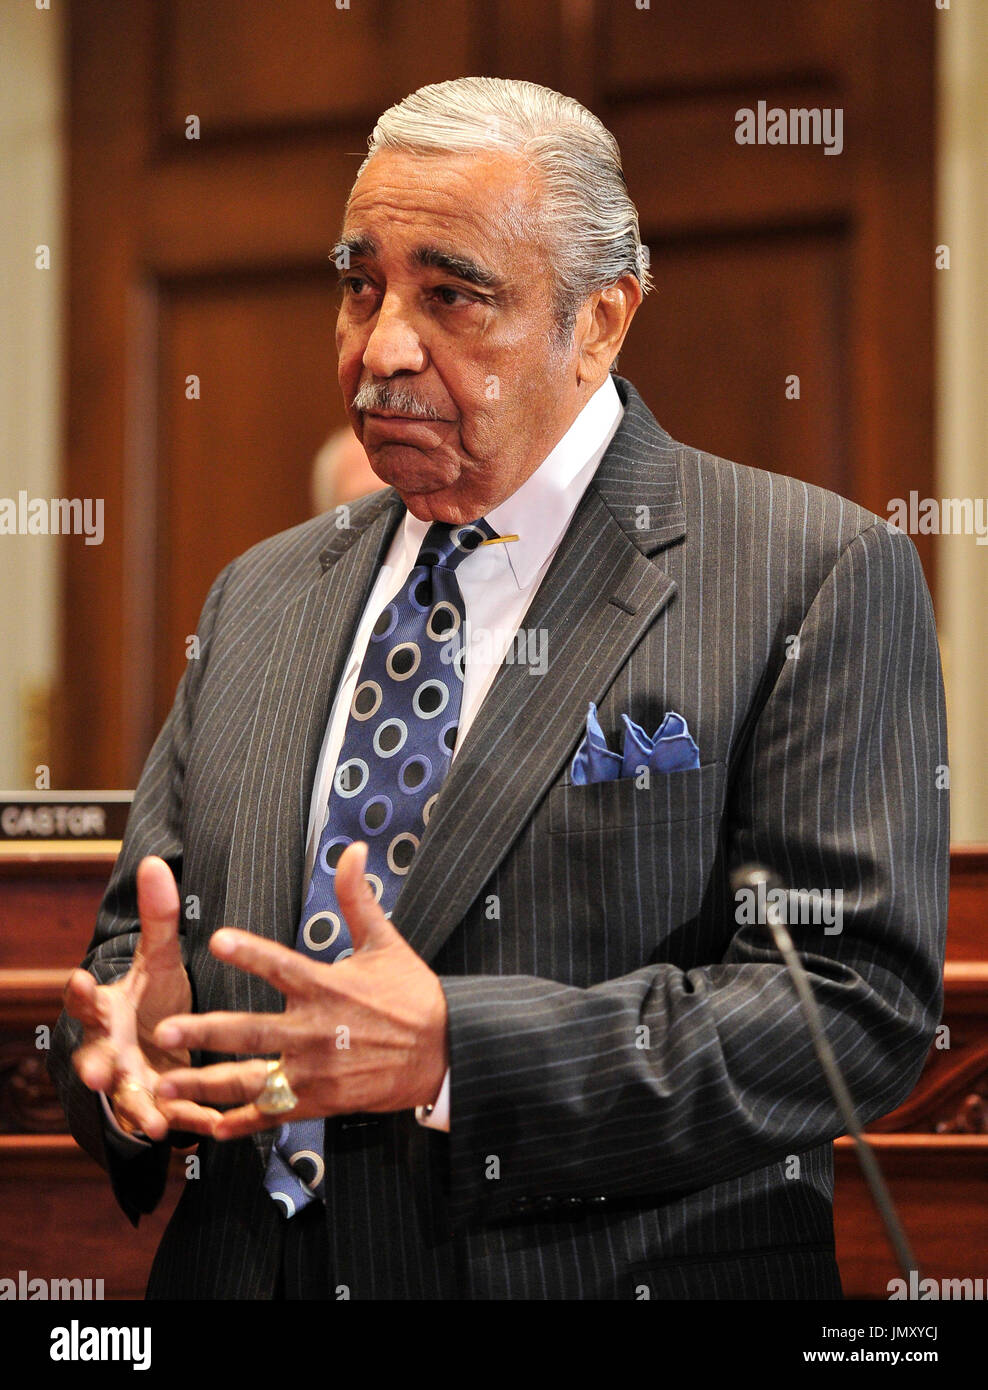 United States Representative Charles Rangel (Democrat of New York) speaks to the U.S. House Committee on Standards of Official Conduct as the committee deliberates his punishment after his conviction on 11 of 13 ethics violations in Washington, D.C. on Thursday, November 18, 2010..Credit: Ron Sachs / CNP.(RESTRICTION: NO New York or New Jersey Newspapers or newspapers within a 75 mile radius of New York City) Stock Photo